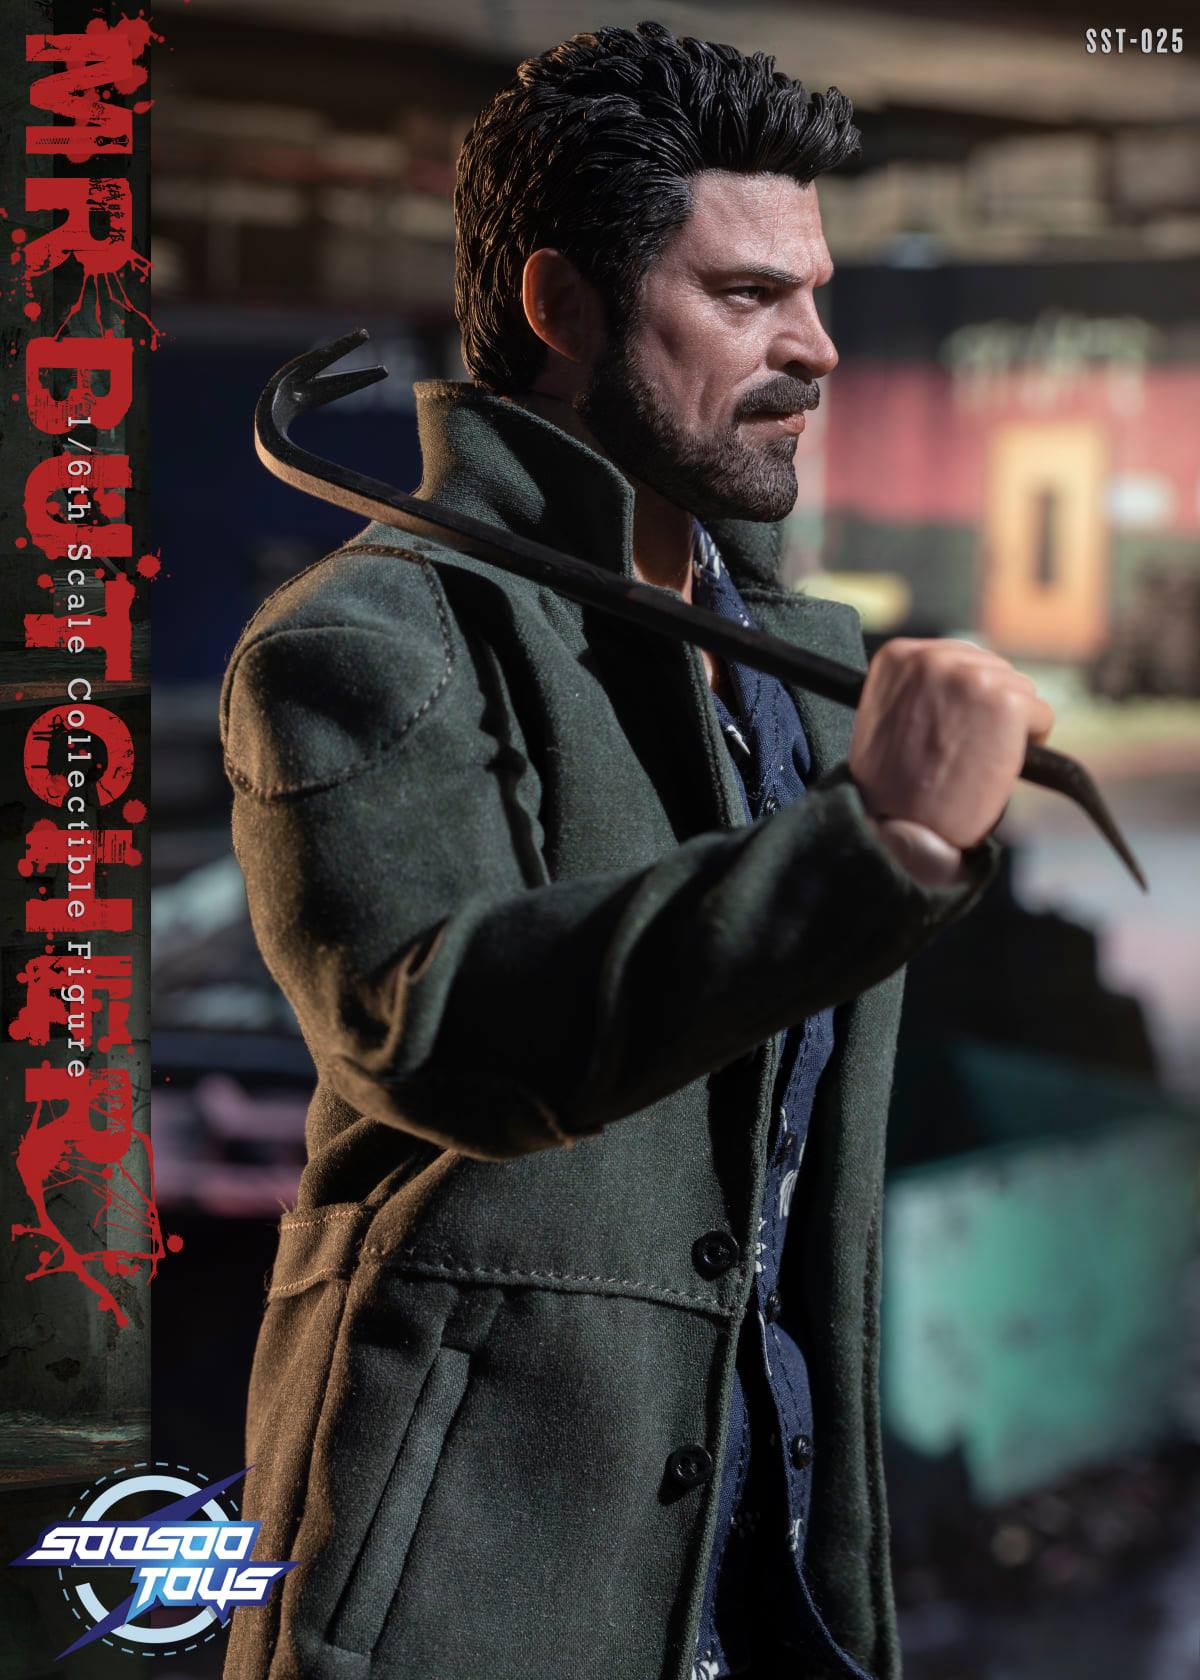 Soosootoys SST025 Mr Butcher 1/6 Scale Collectible Figure – Pop